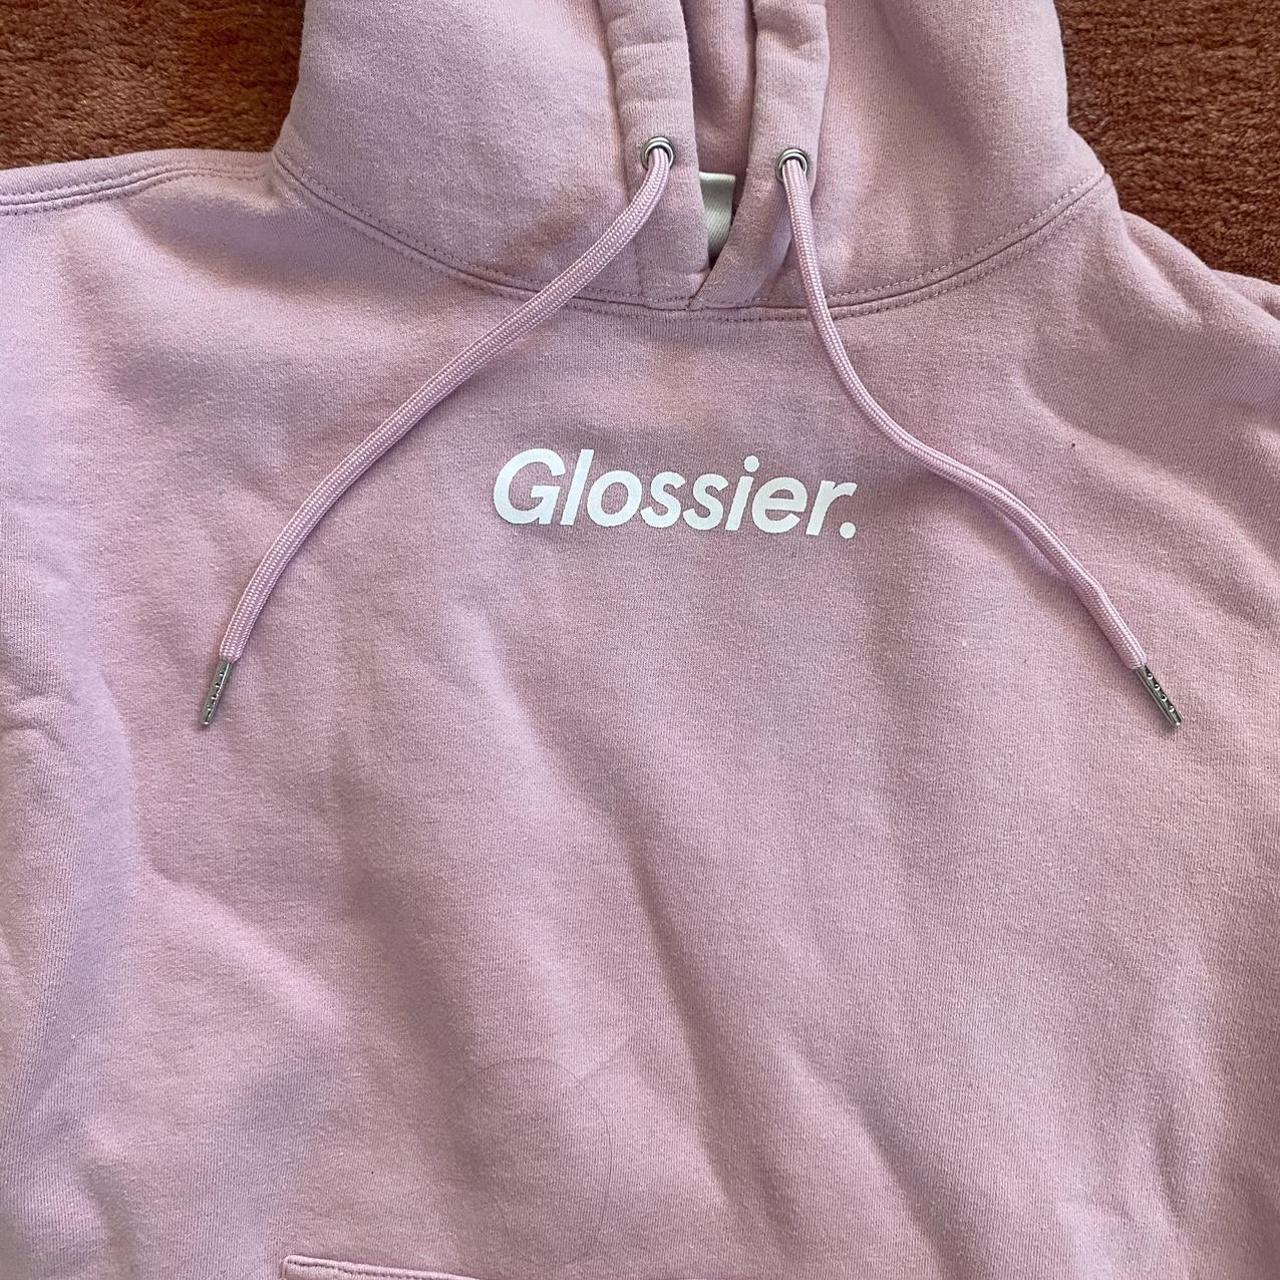 Glossier pink hoodie size extra small #glossier - Depop